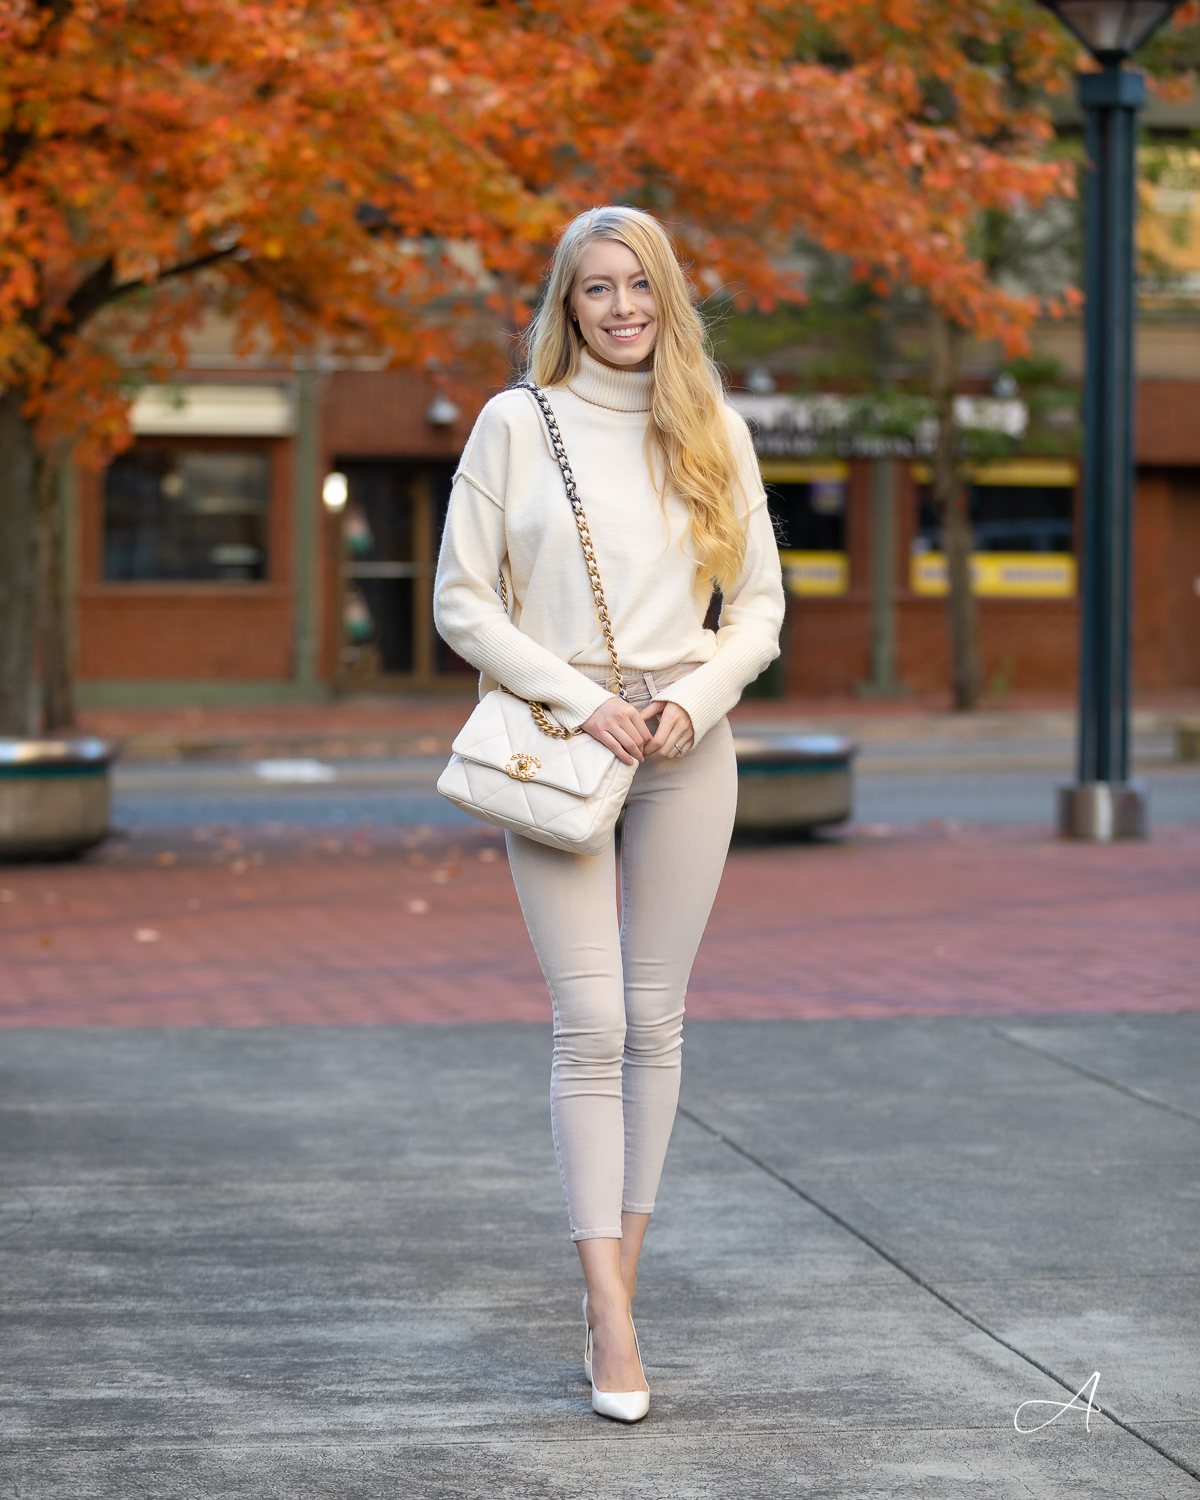 Chanel 19 Styled with a Neutral Outfit - Alyssa Smirnov